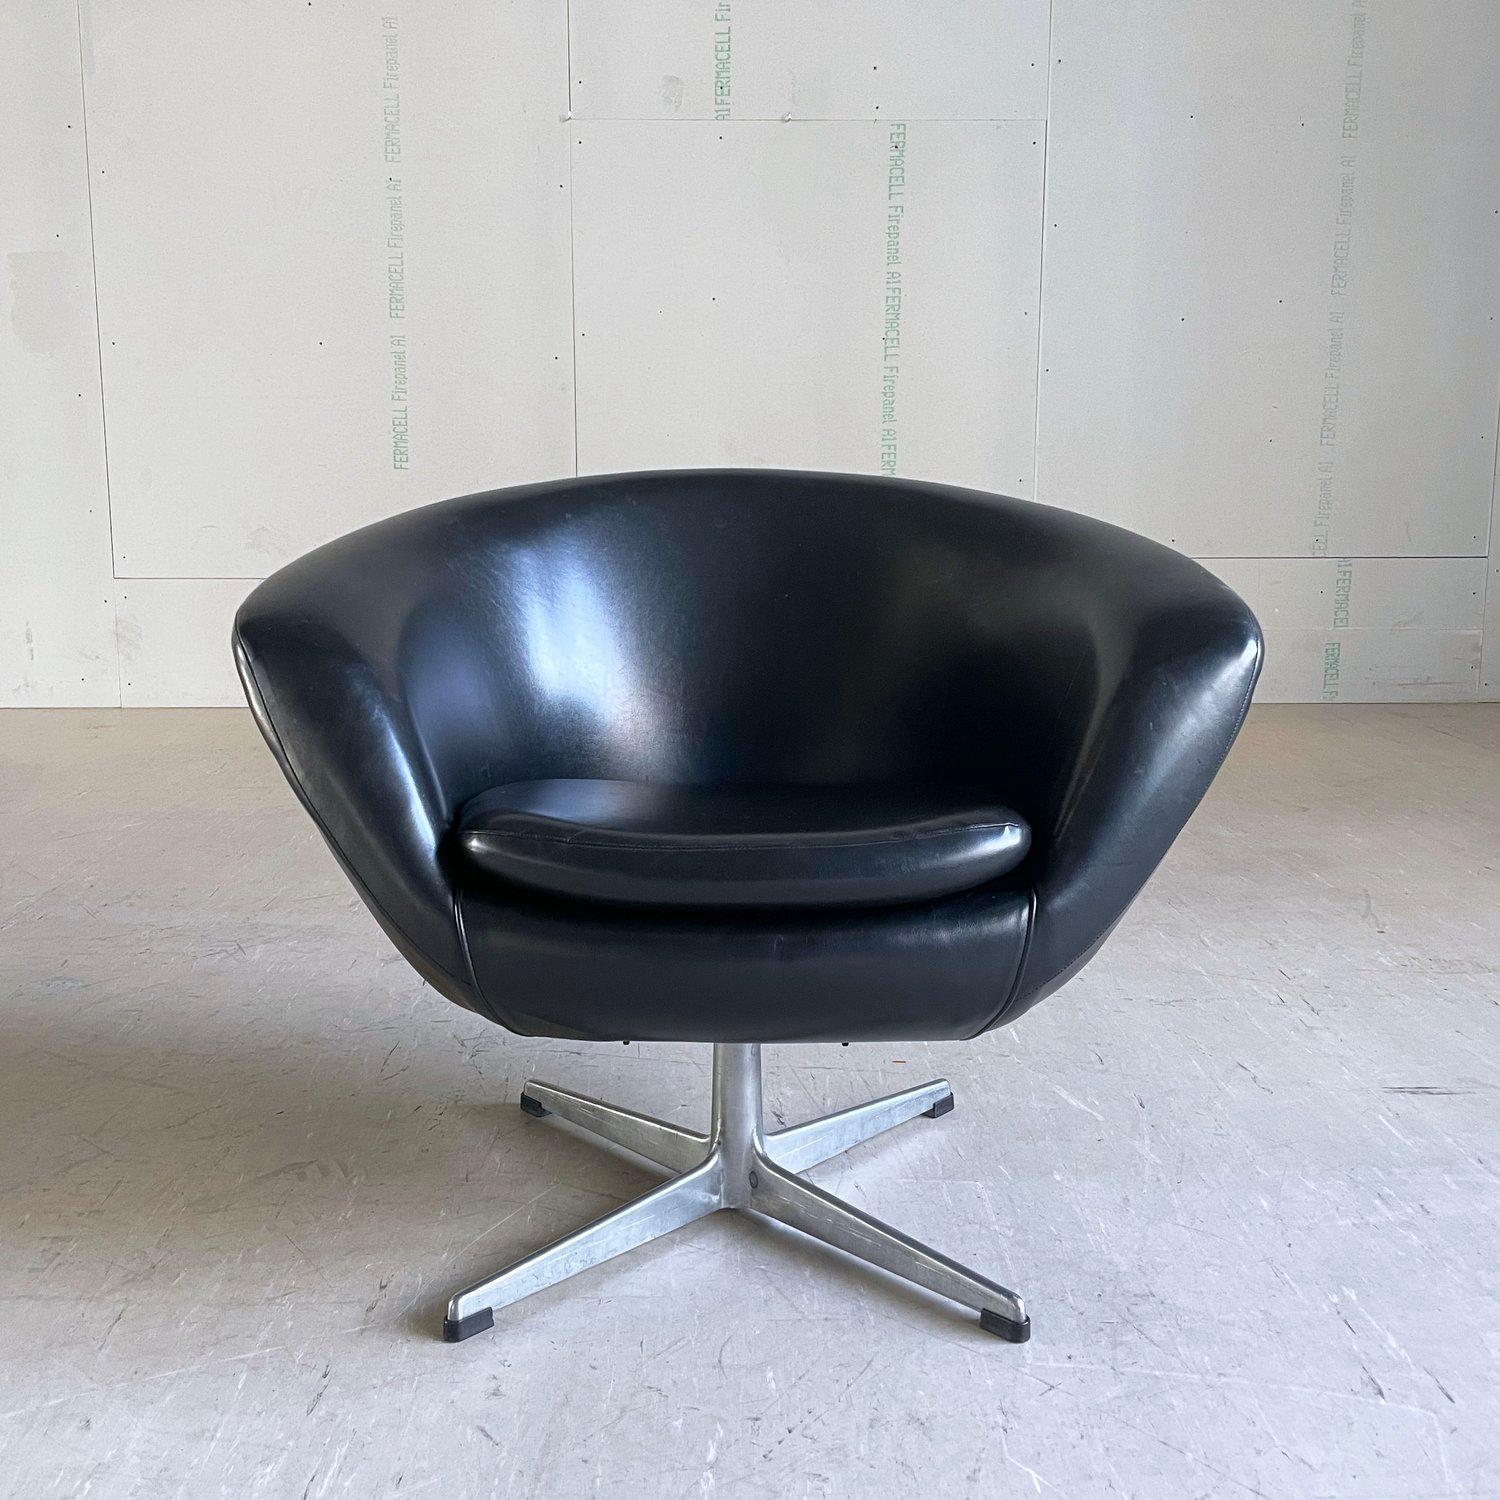 1970’s Overman swiveling 'Pod' armchair / club chair. Black leatherette upholstery with a aluminium base. Produced by Overman International, Sweden. Light construction with aluminium swivel base. 